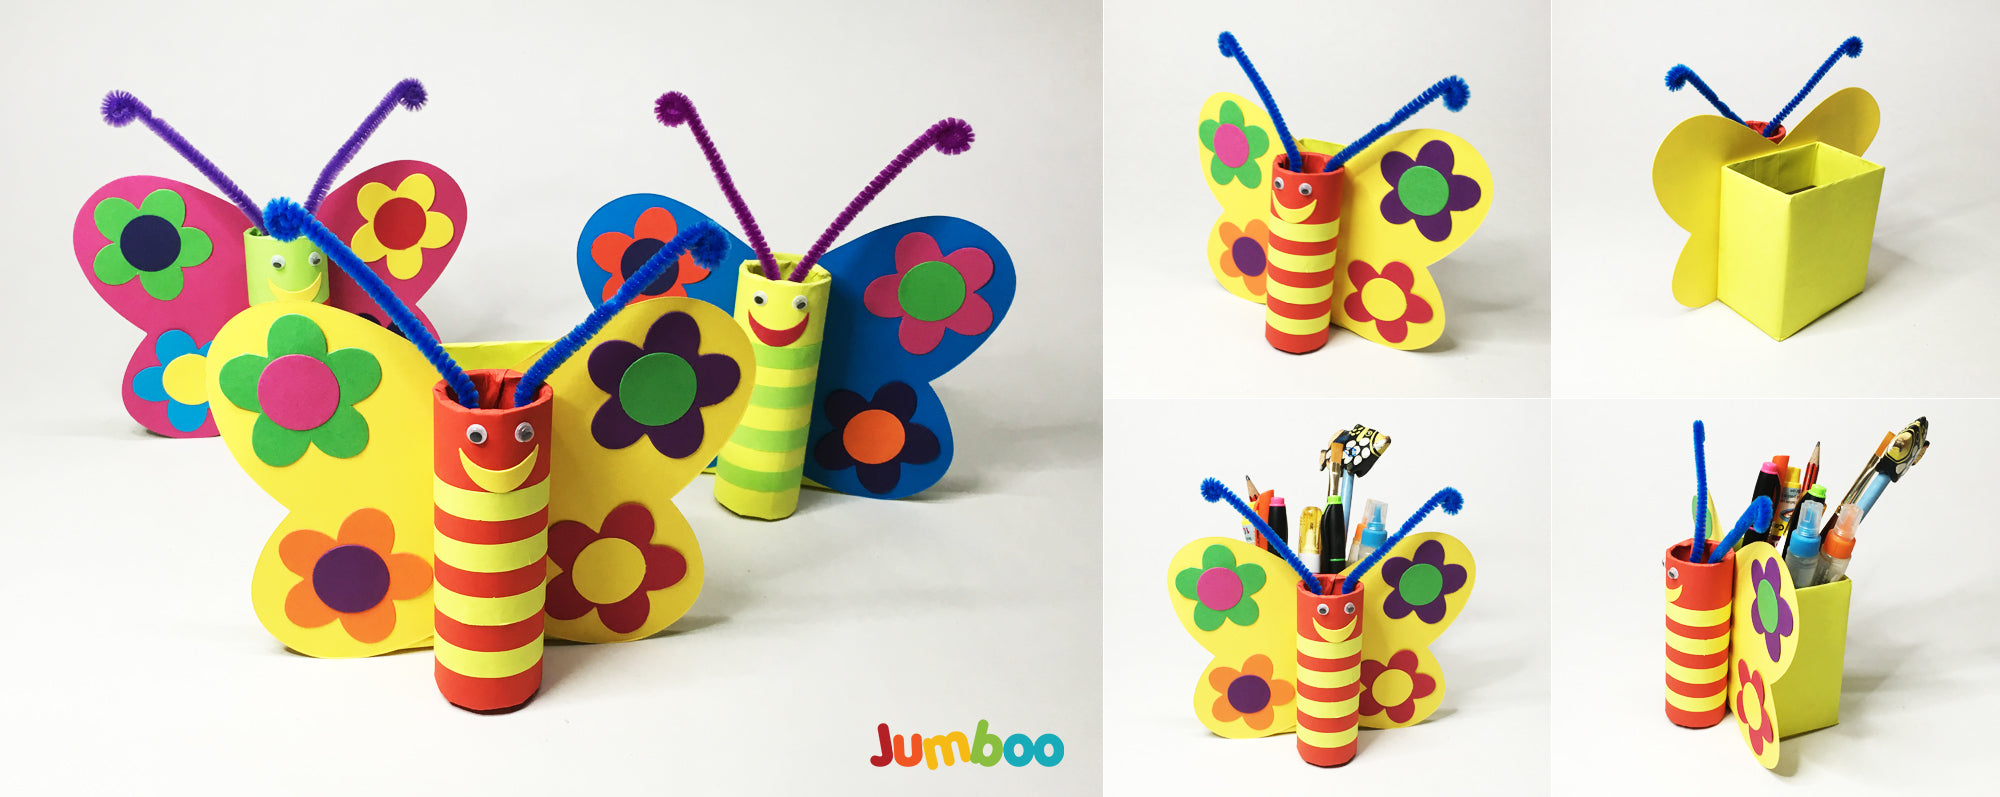 Butterfly Stand DIY Paper Art & Craft Kit - Jumboo Toys